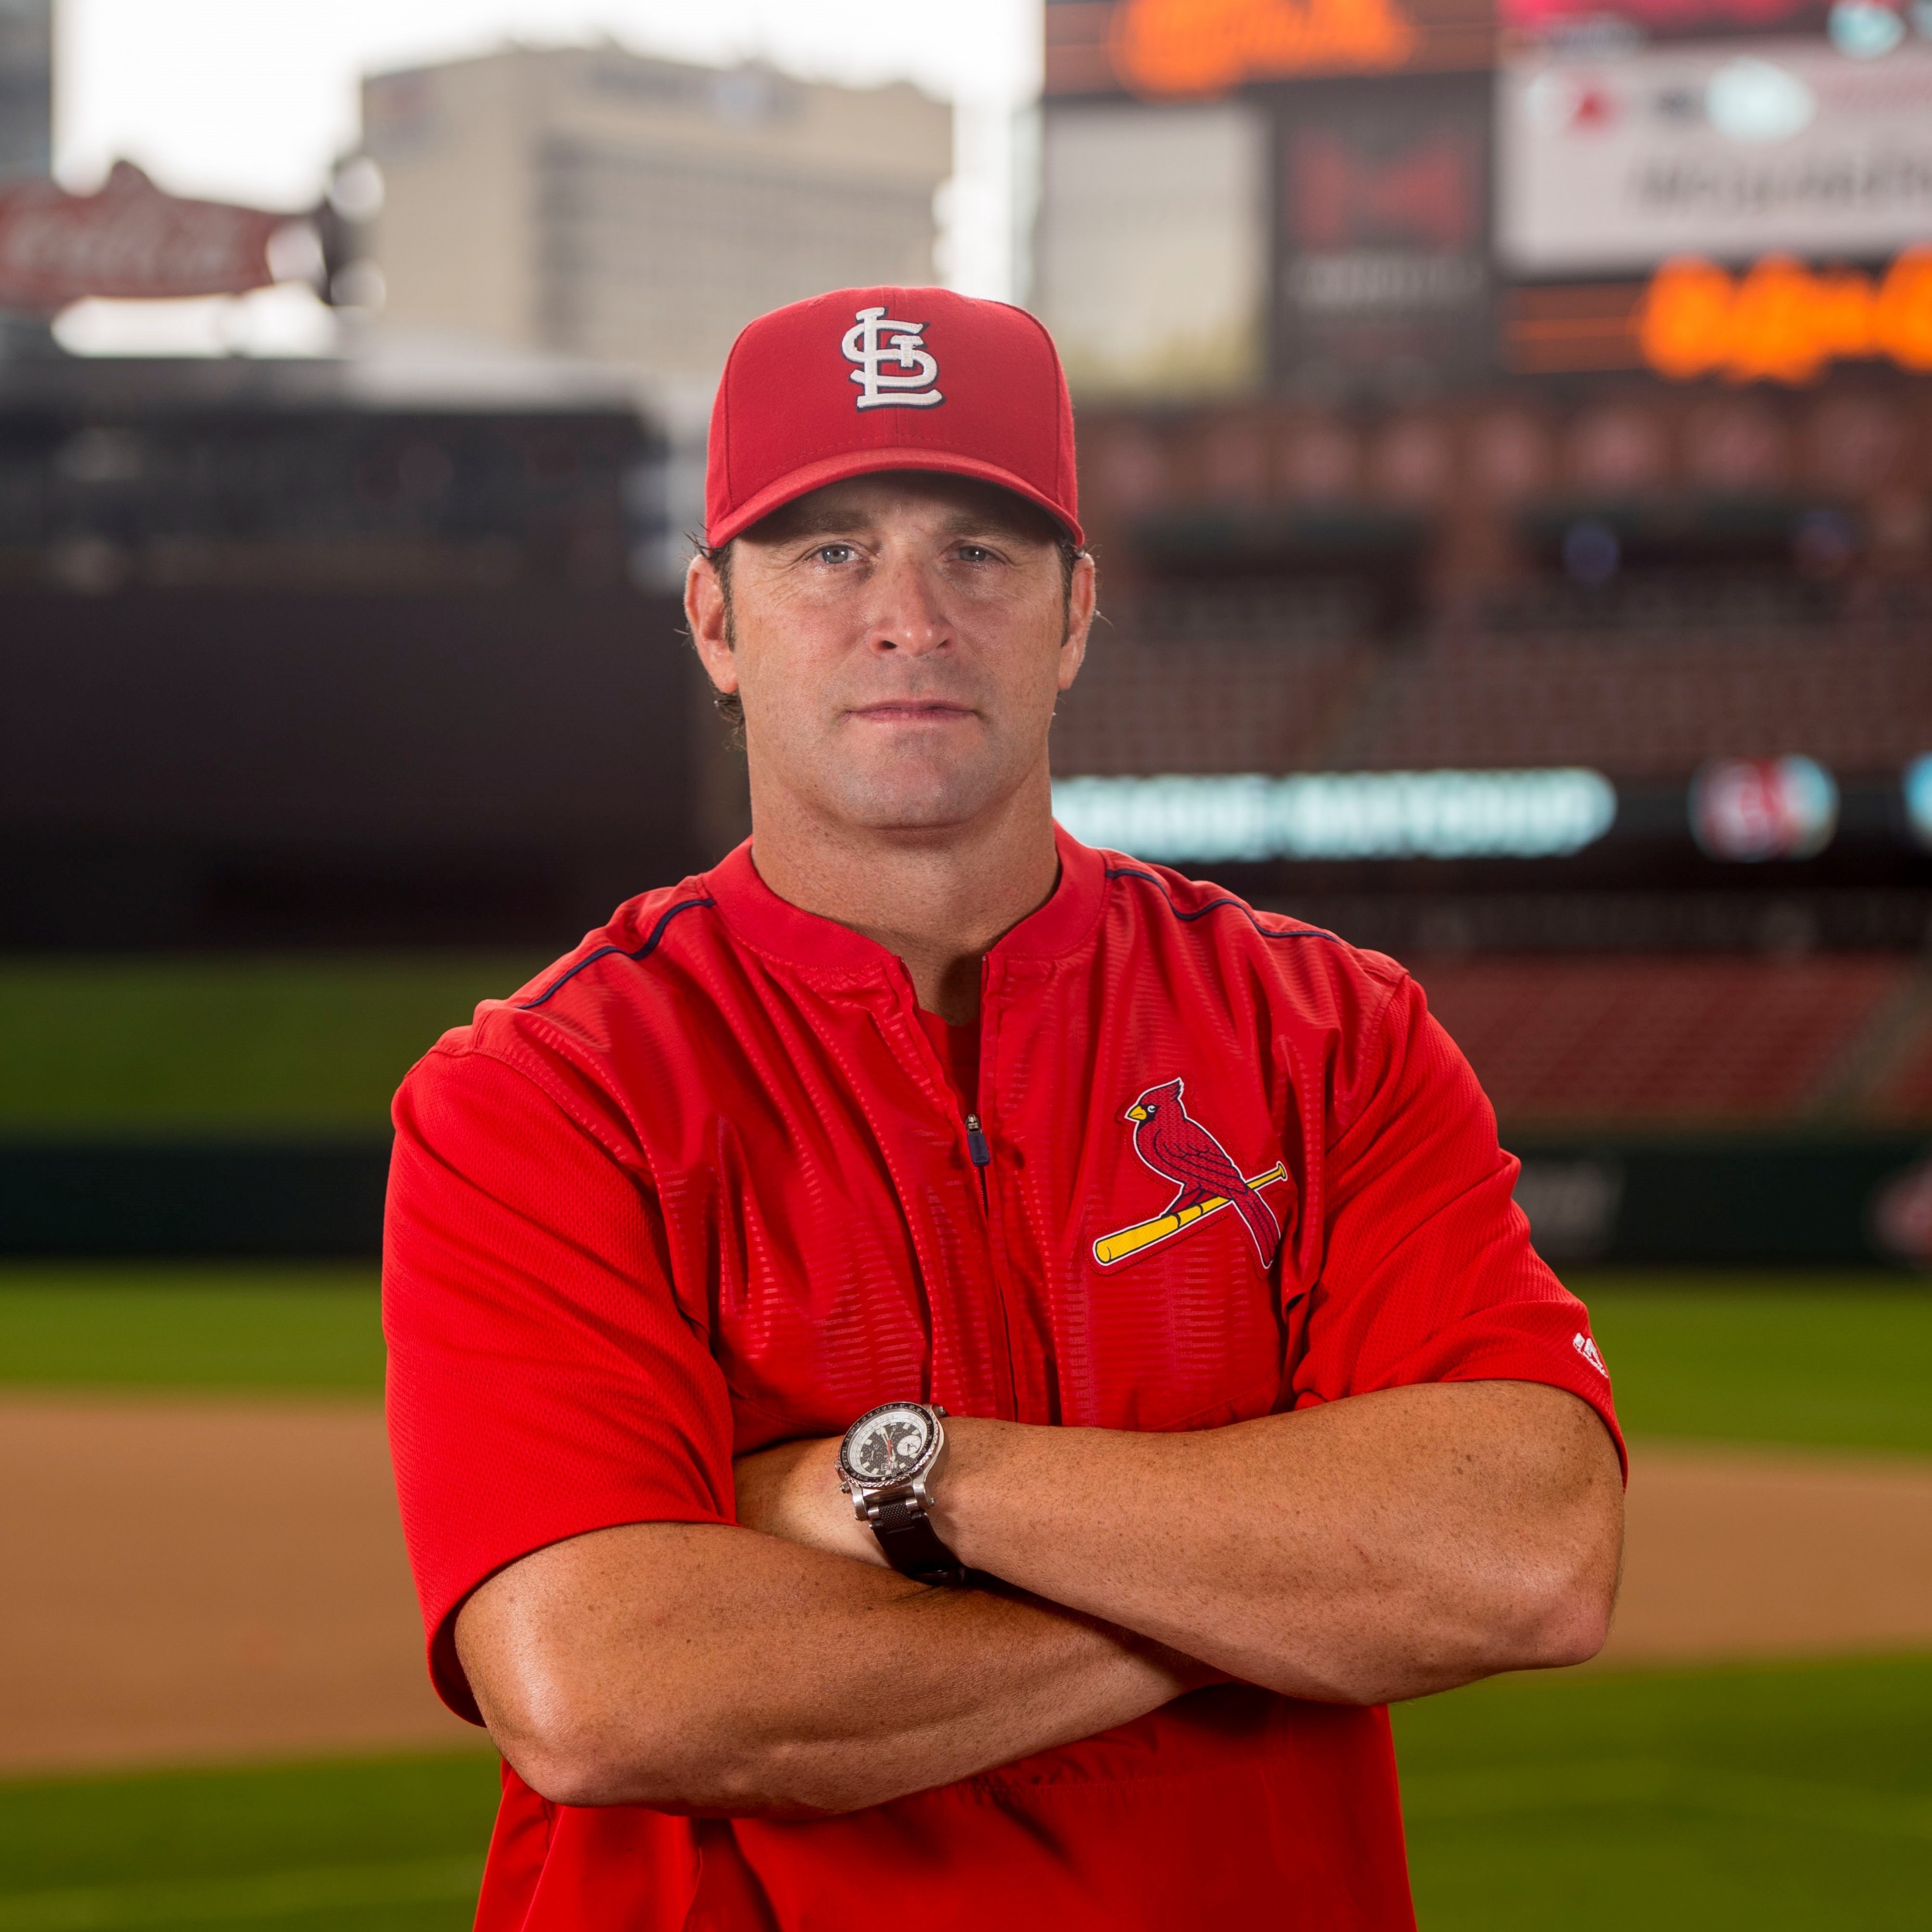 Illinois College welcomes St. Louis Cardinals Manager Mike Matheny | Illinois College